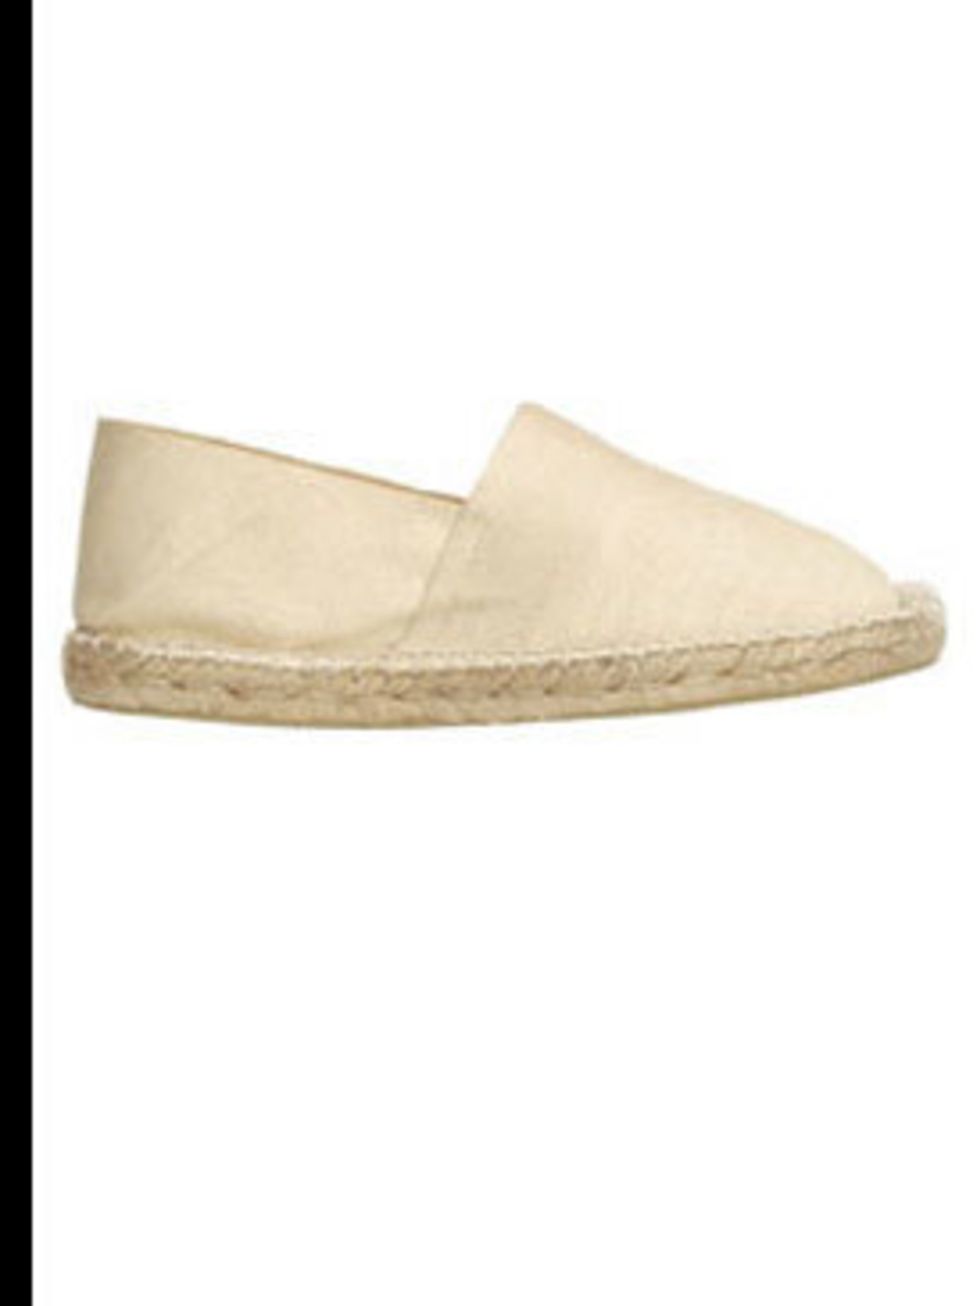 <p>Beige espadrilles, £15, by <a href="http://www.toast.co.uk/product/shoes/F1ES1/canvas+espadrille.htm?categoryref=%2Fcategory2.aspx%3Fcategoryid%3Dshoes%26seoterm%3Dshoes%26nopaging%3Dtrue%26">Toast</a></p>